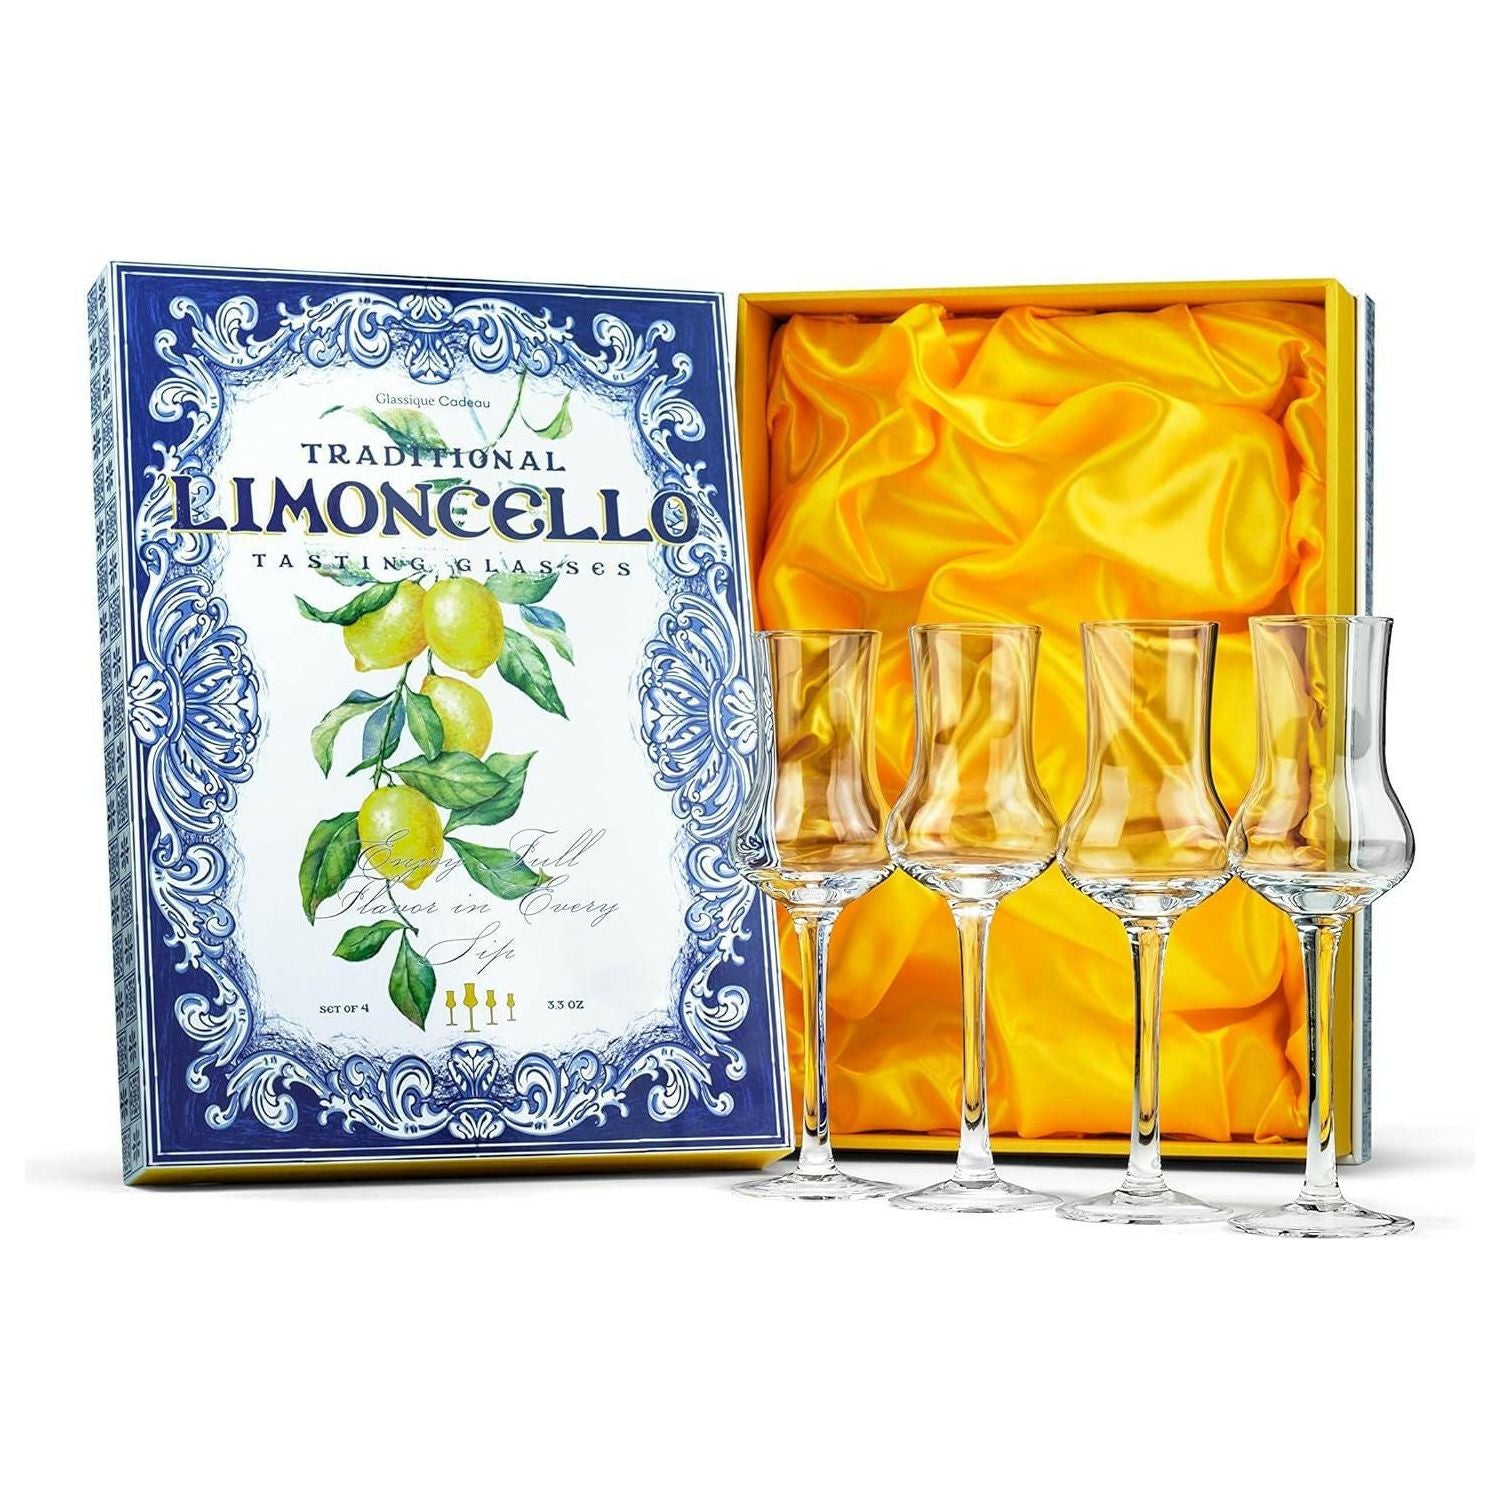 Glassique Cadeau Crystal Limoncello Cordial Glasses | Set of 4 | Tall 3.3 oz Long Stemmed Spirit Glassware for Sipping Aromatic Liquor, After Dinner